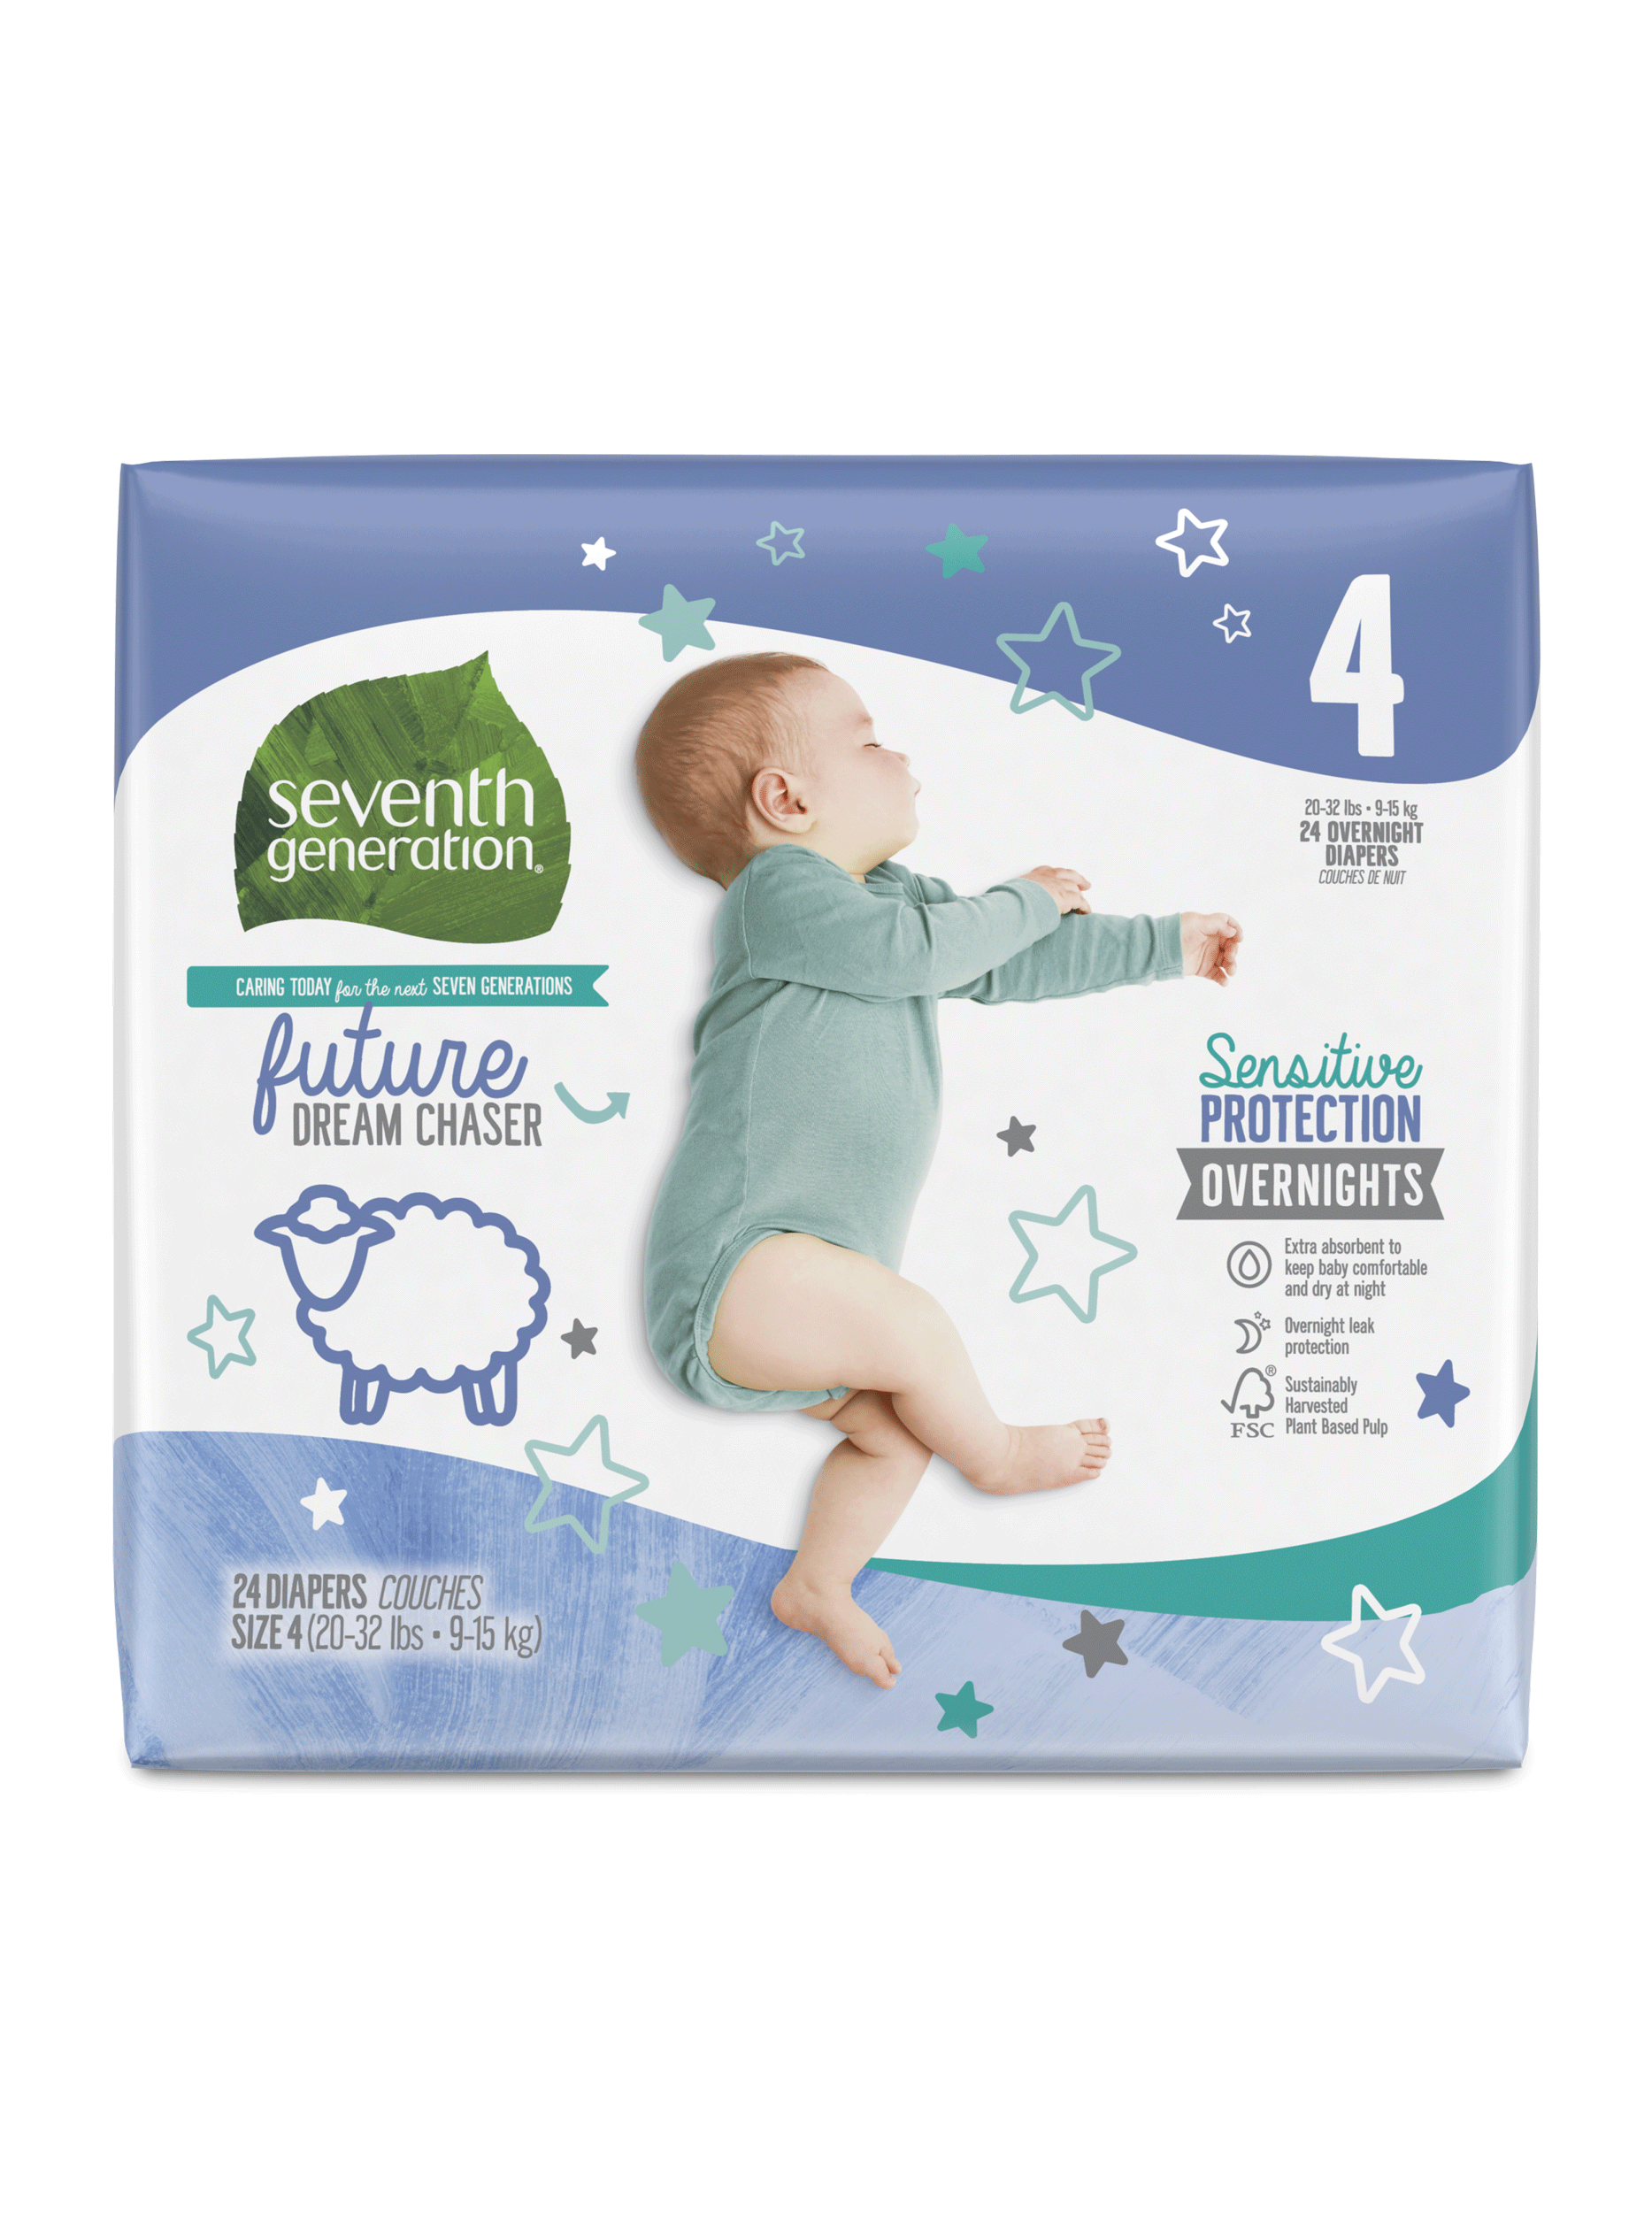 Overnight Diapers - Simplest Baby